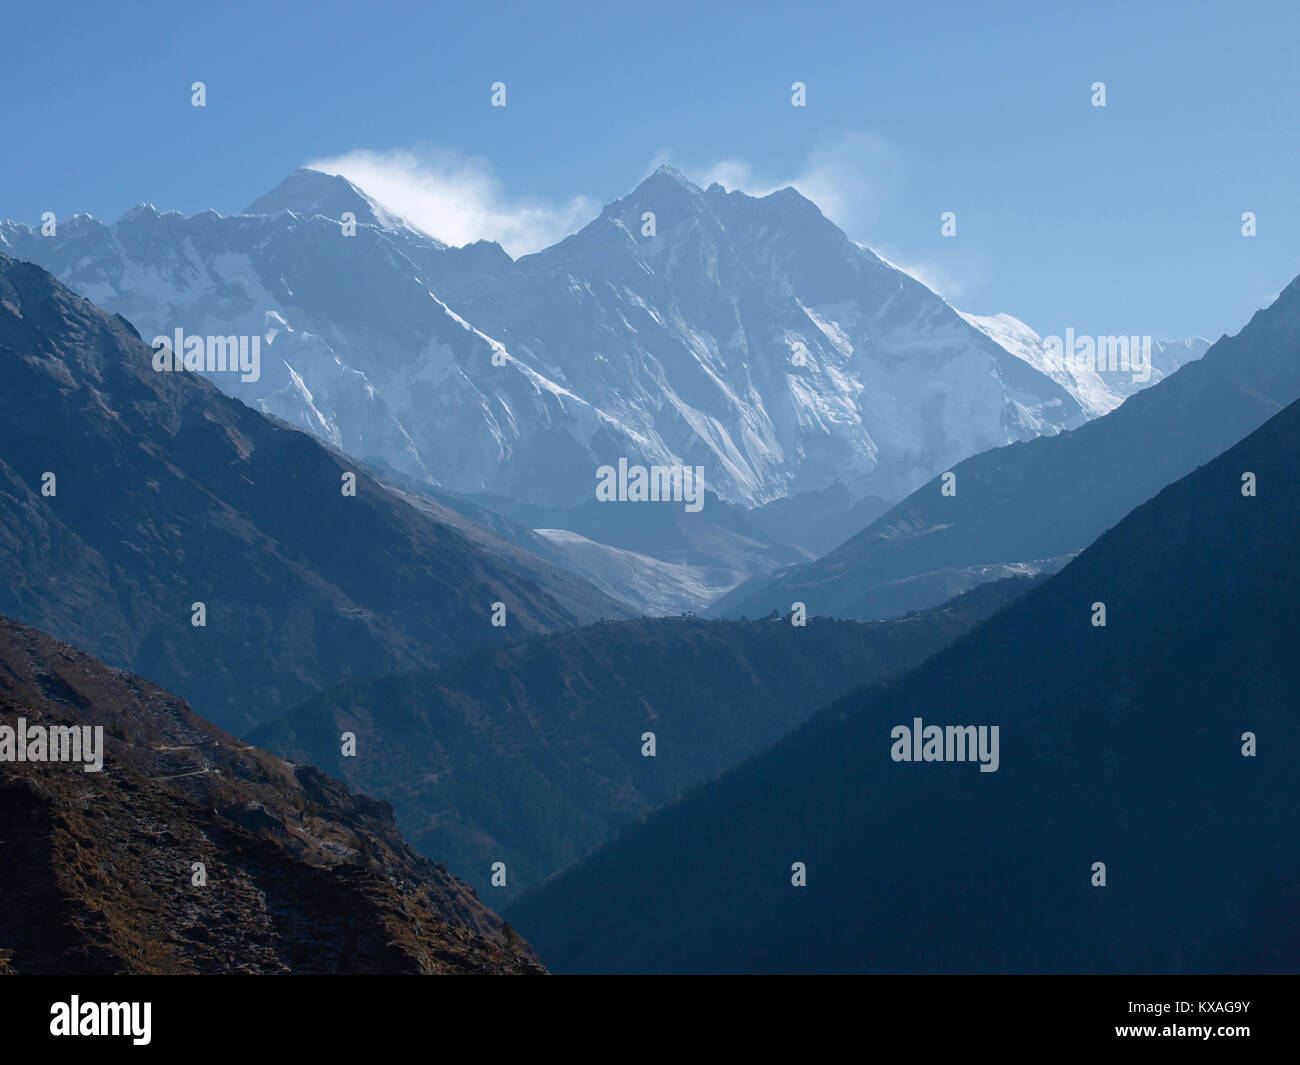 View on Mount Everest, the highest peak in world, as seen from Namche Bazar, Khumbu, Nepal Stock Photo